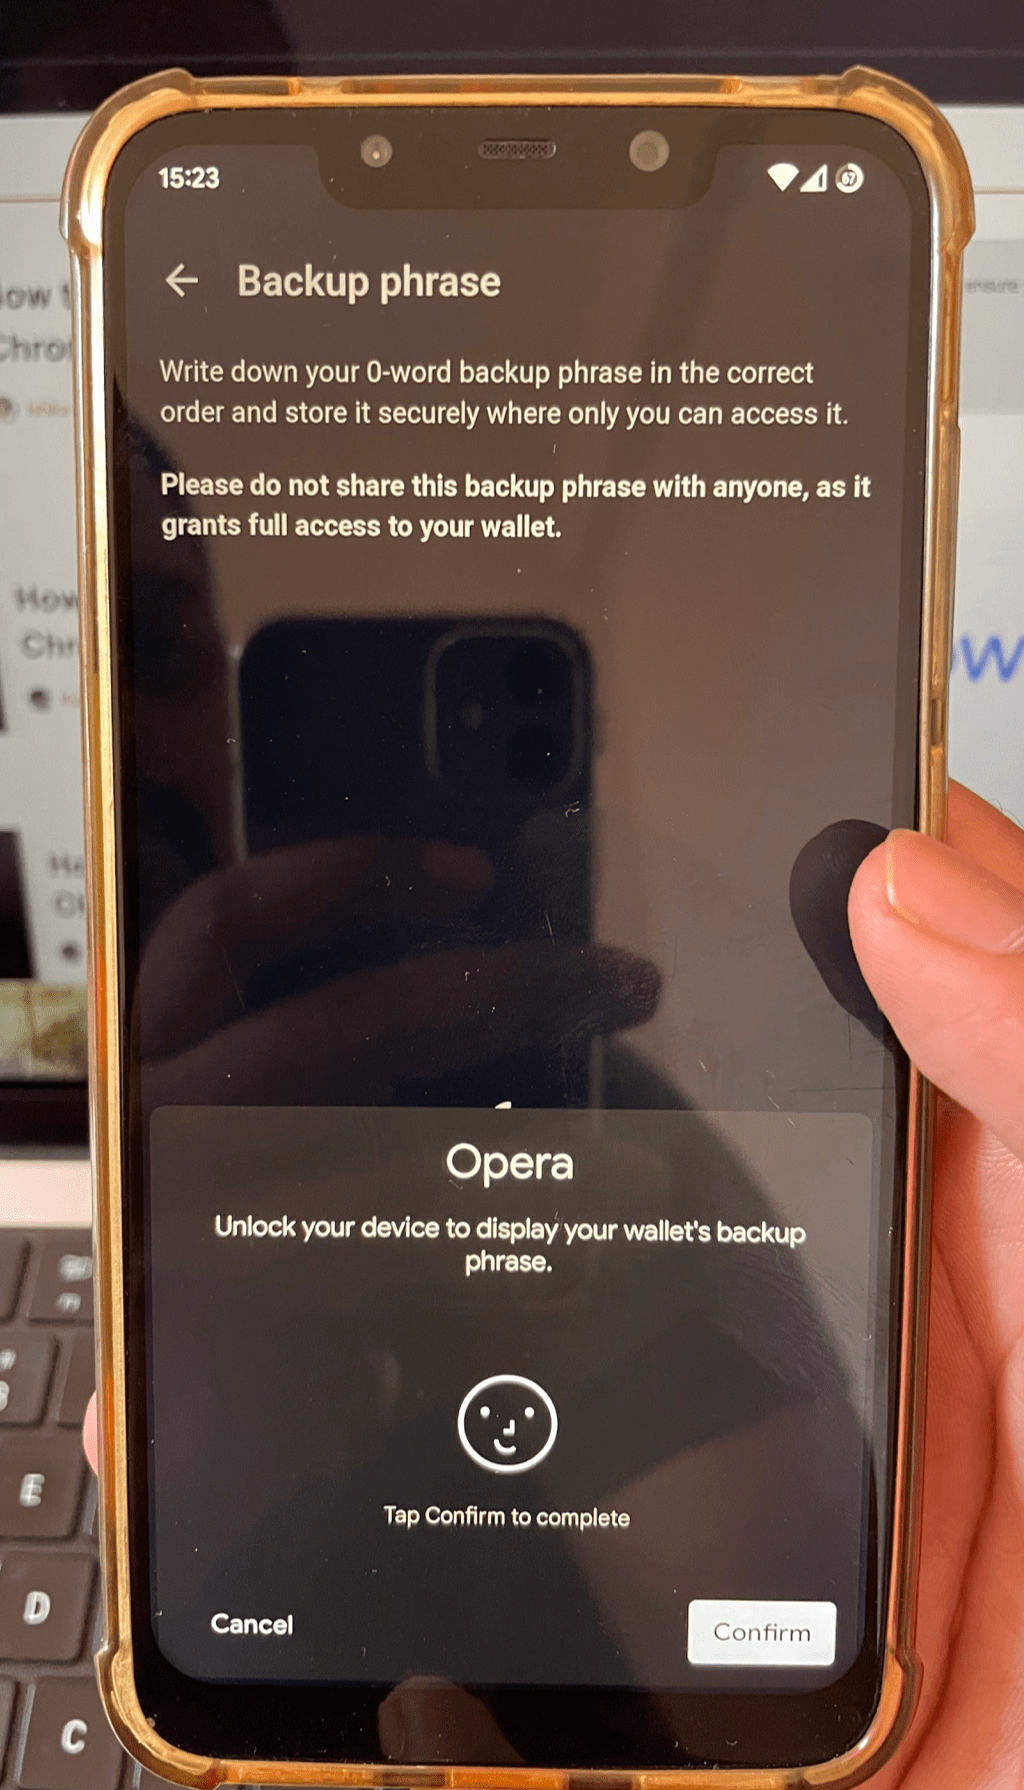 Backup Phrase is protected with device lock on Opera Android